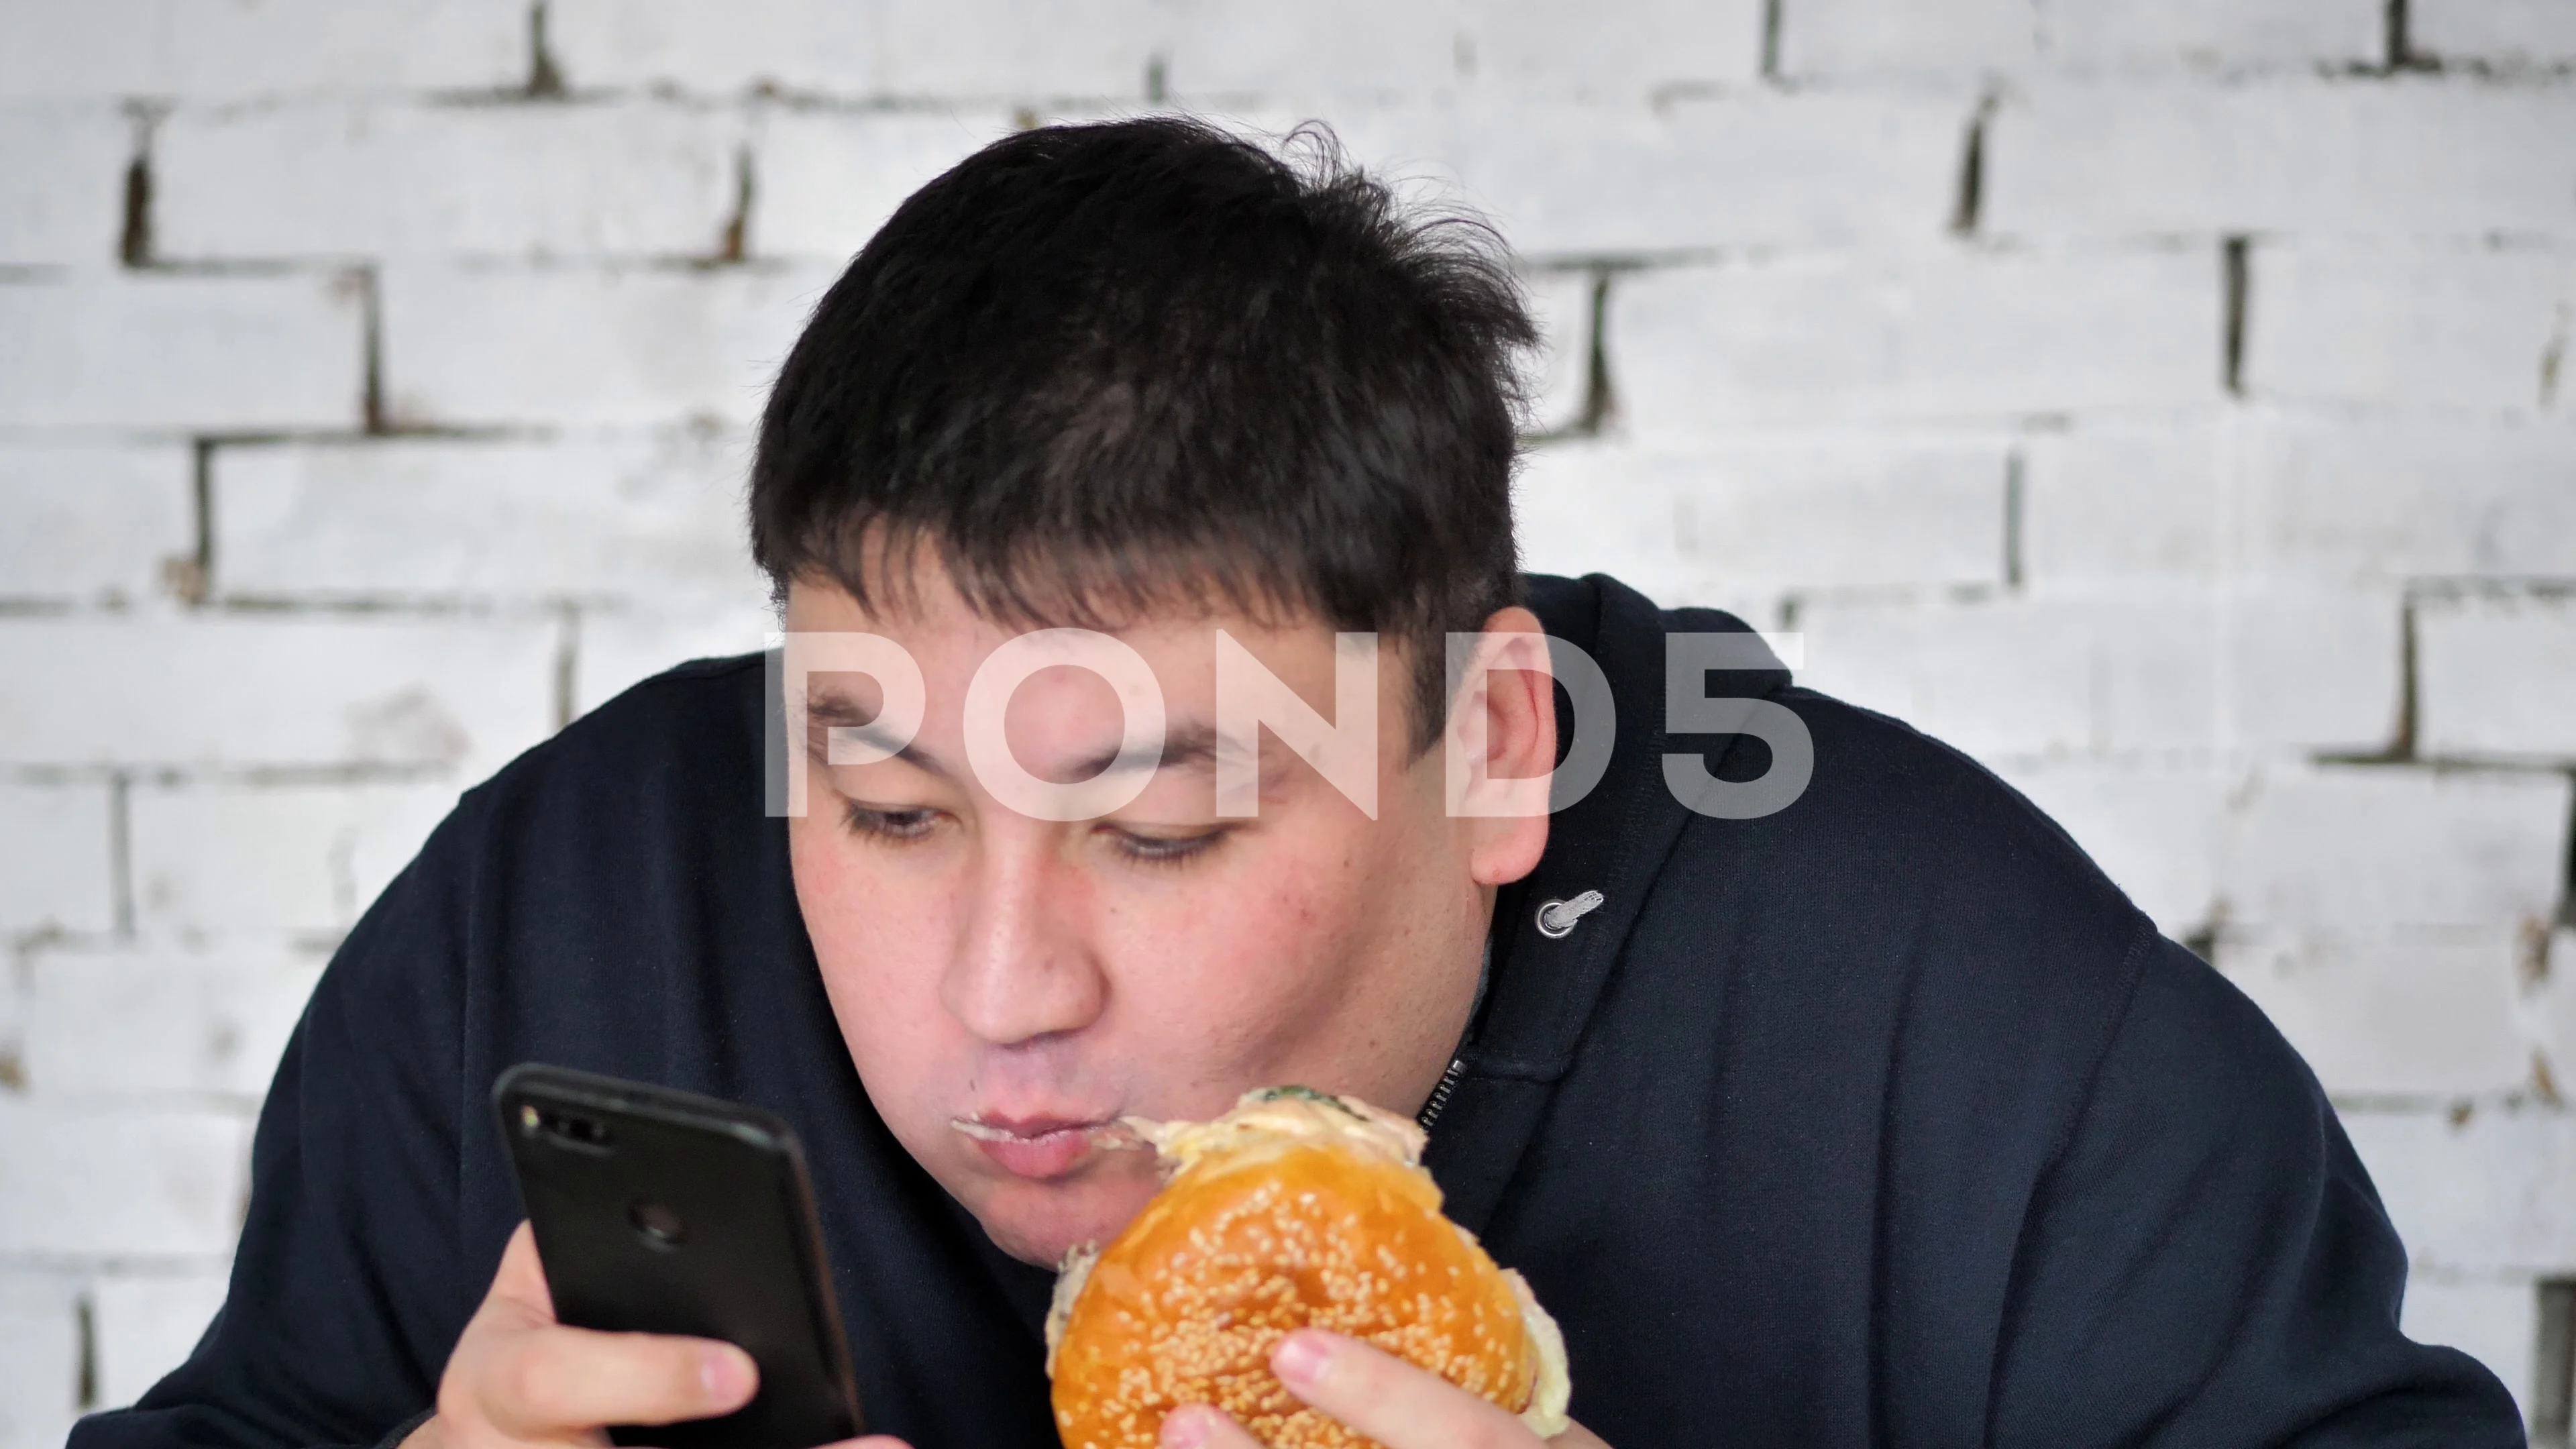 fat people eating burgers